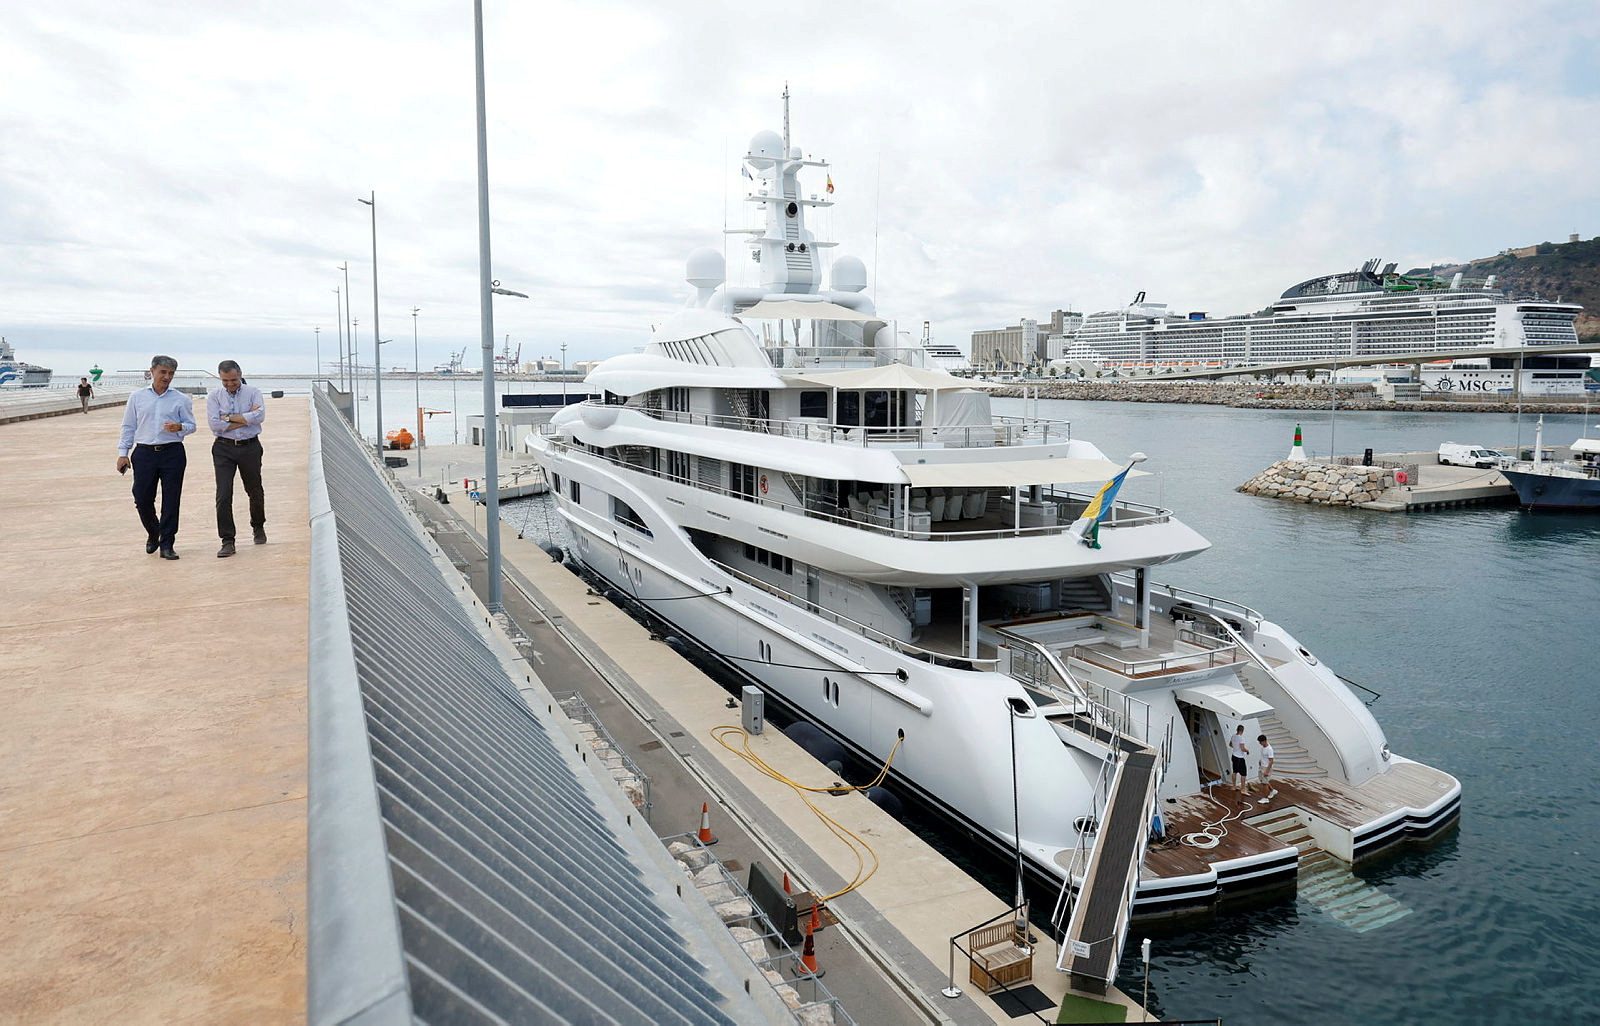 Spain Moves Yacht Linked to Russian Oligarch After Shipyard Payments Stop